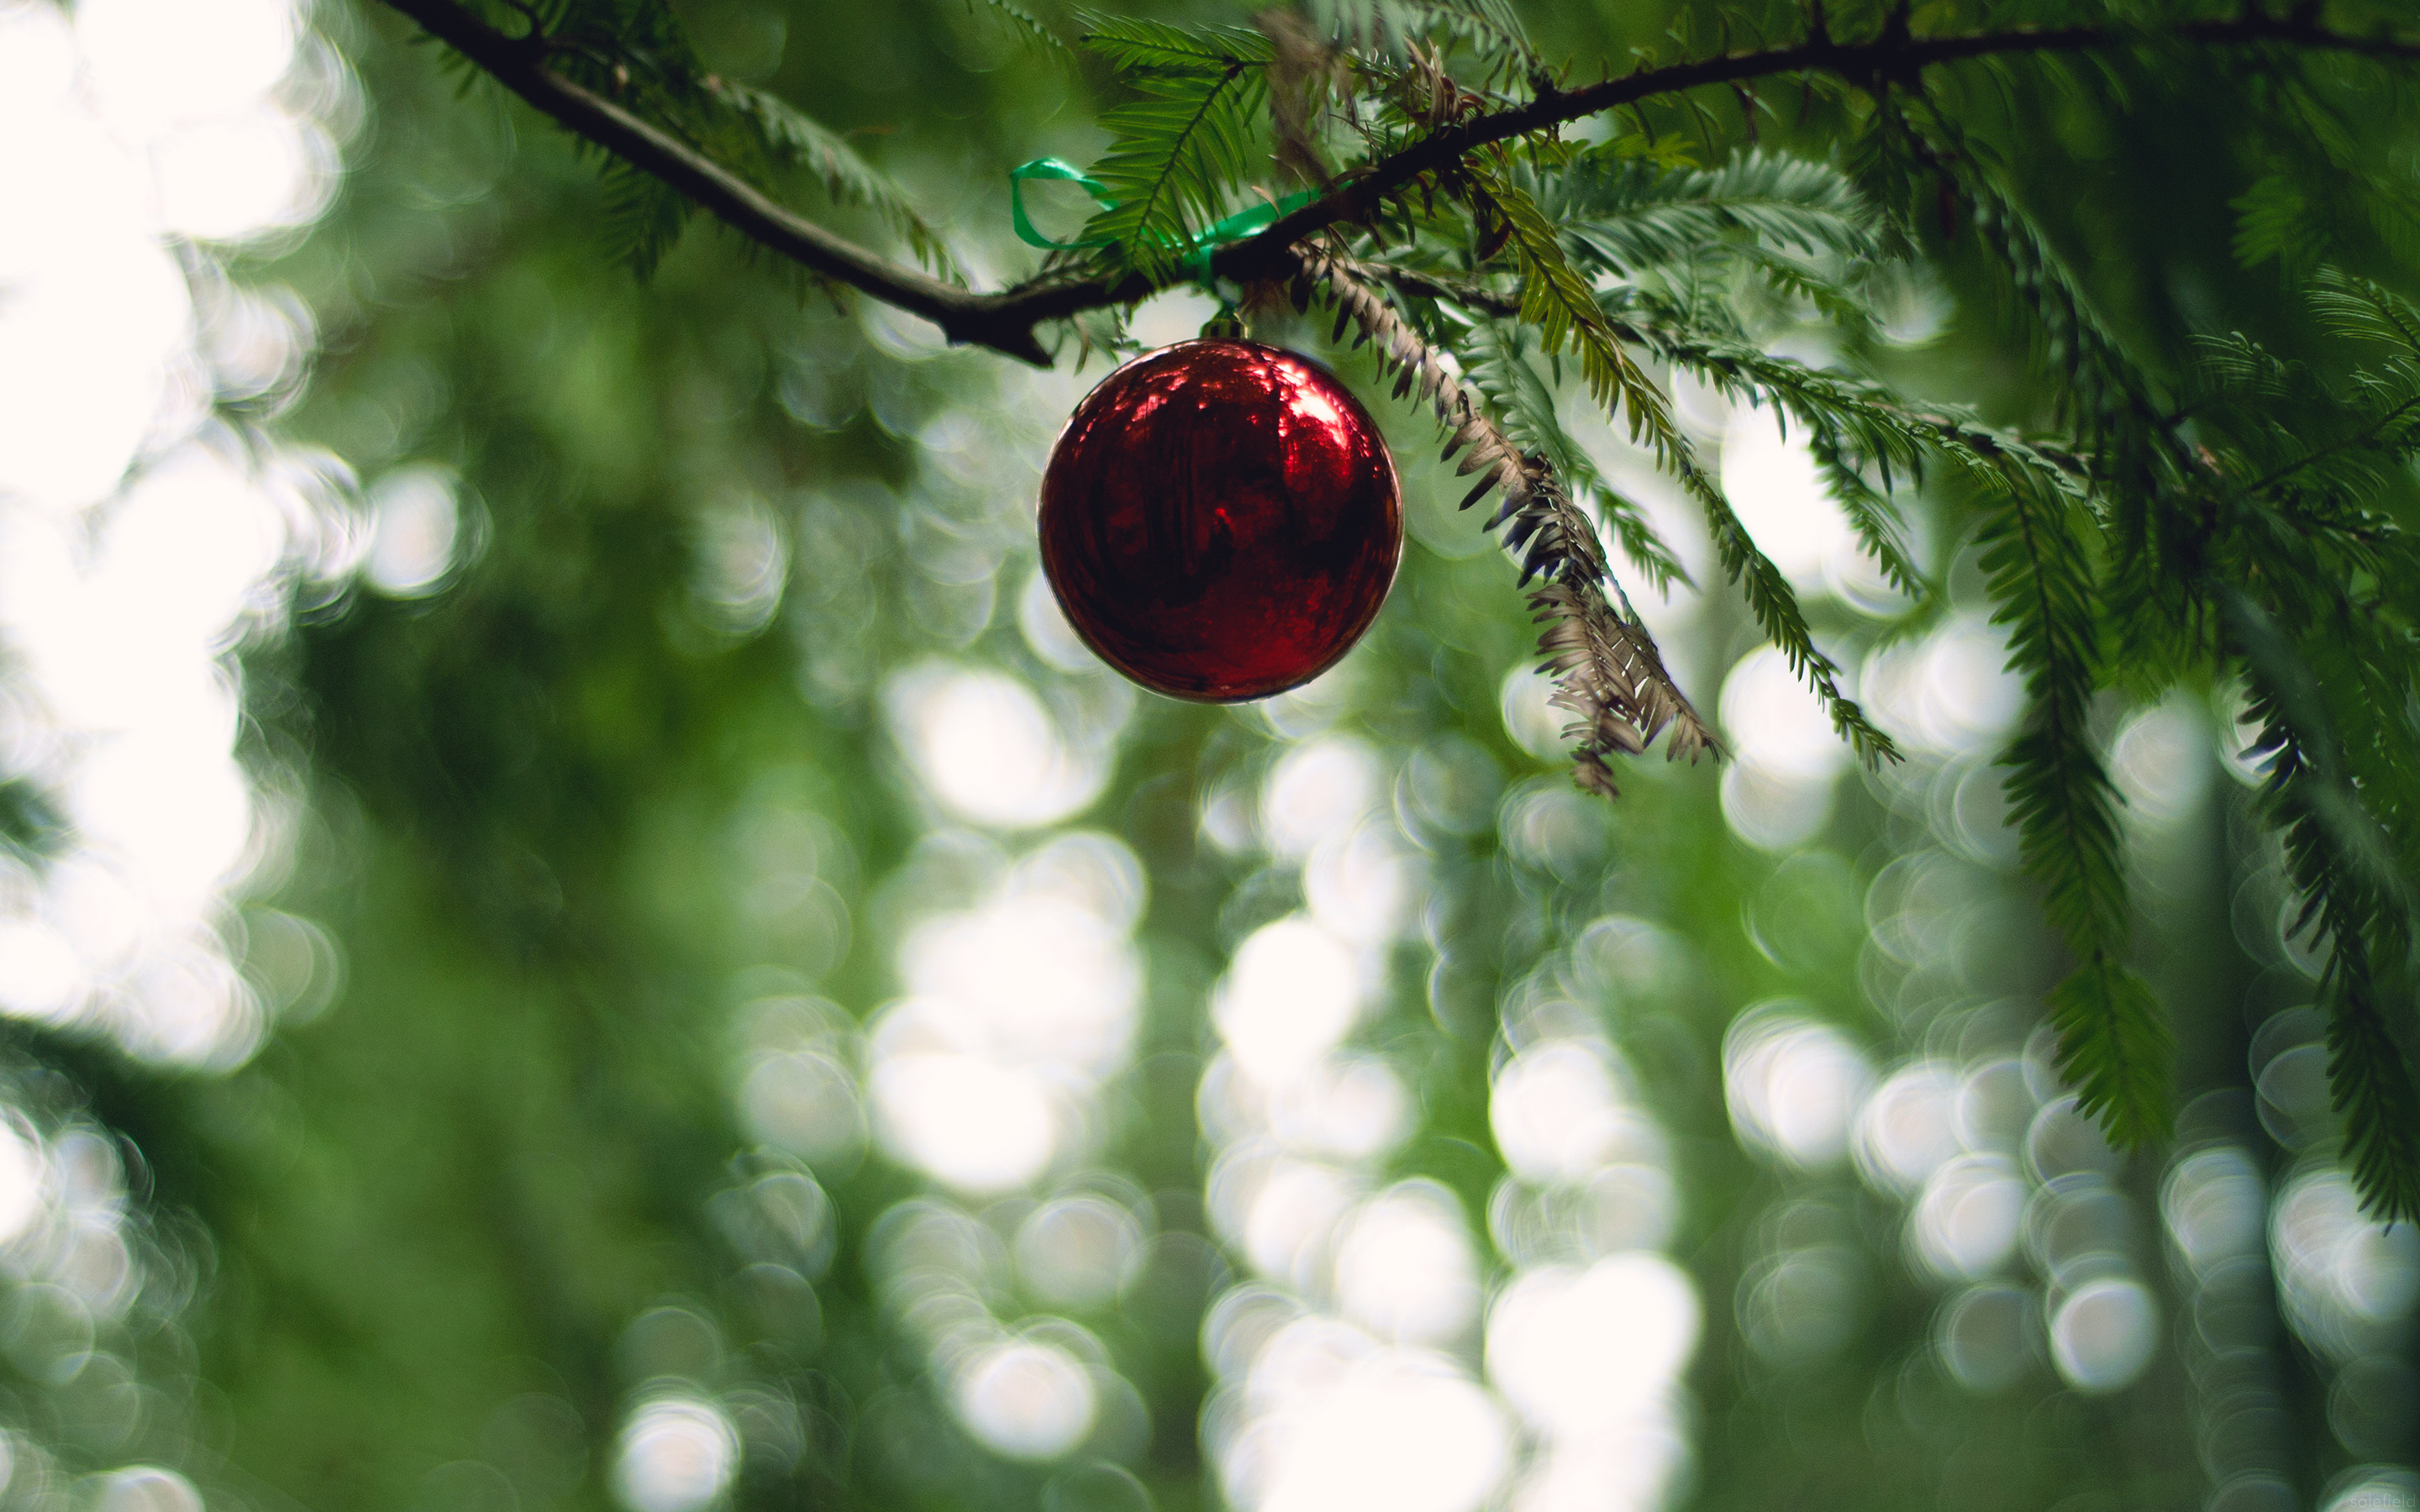 Christmas Ornament in a Forest